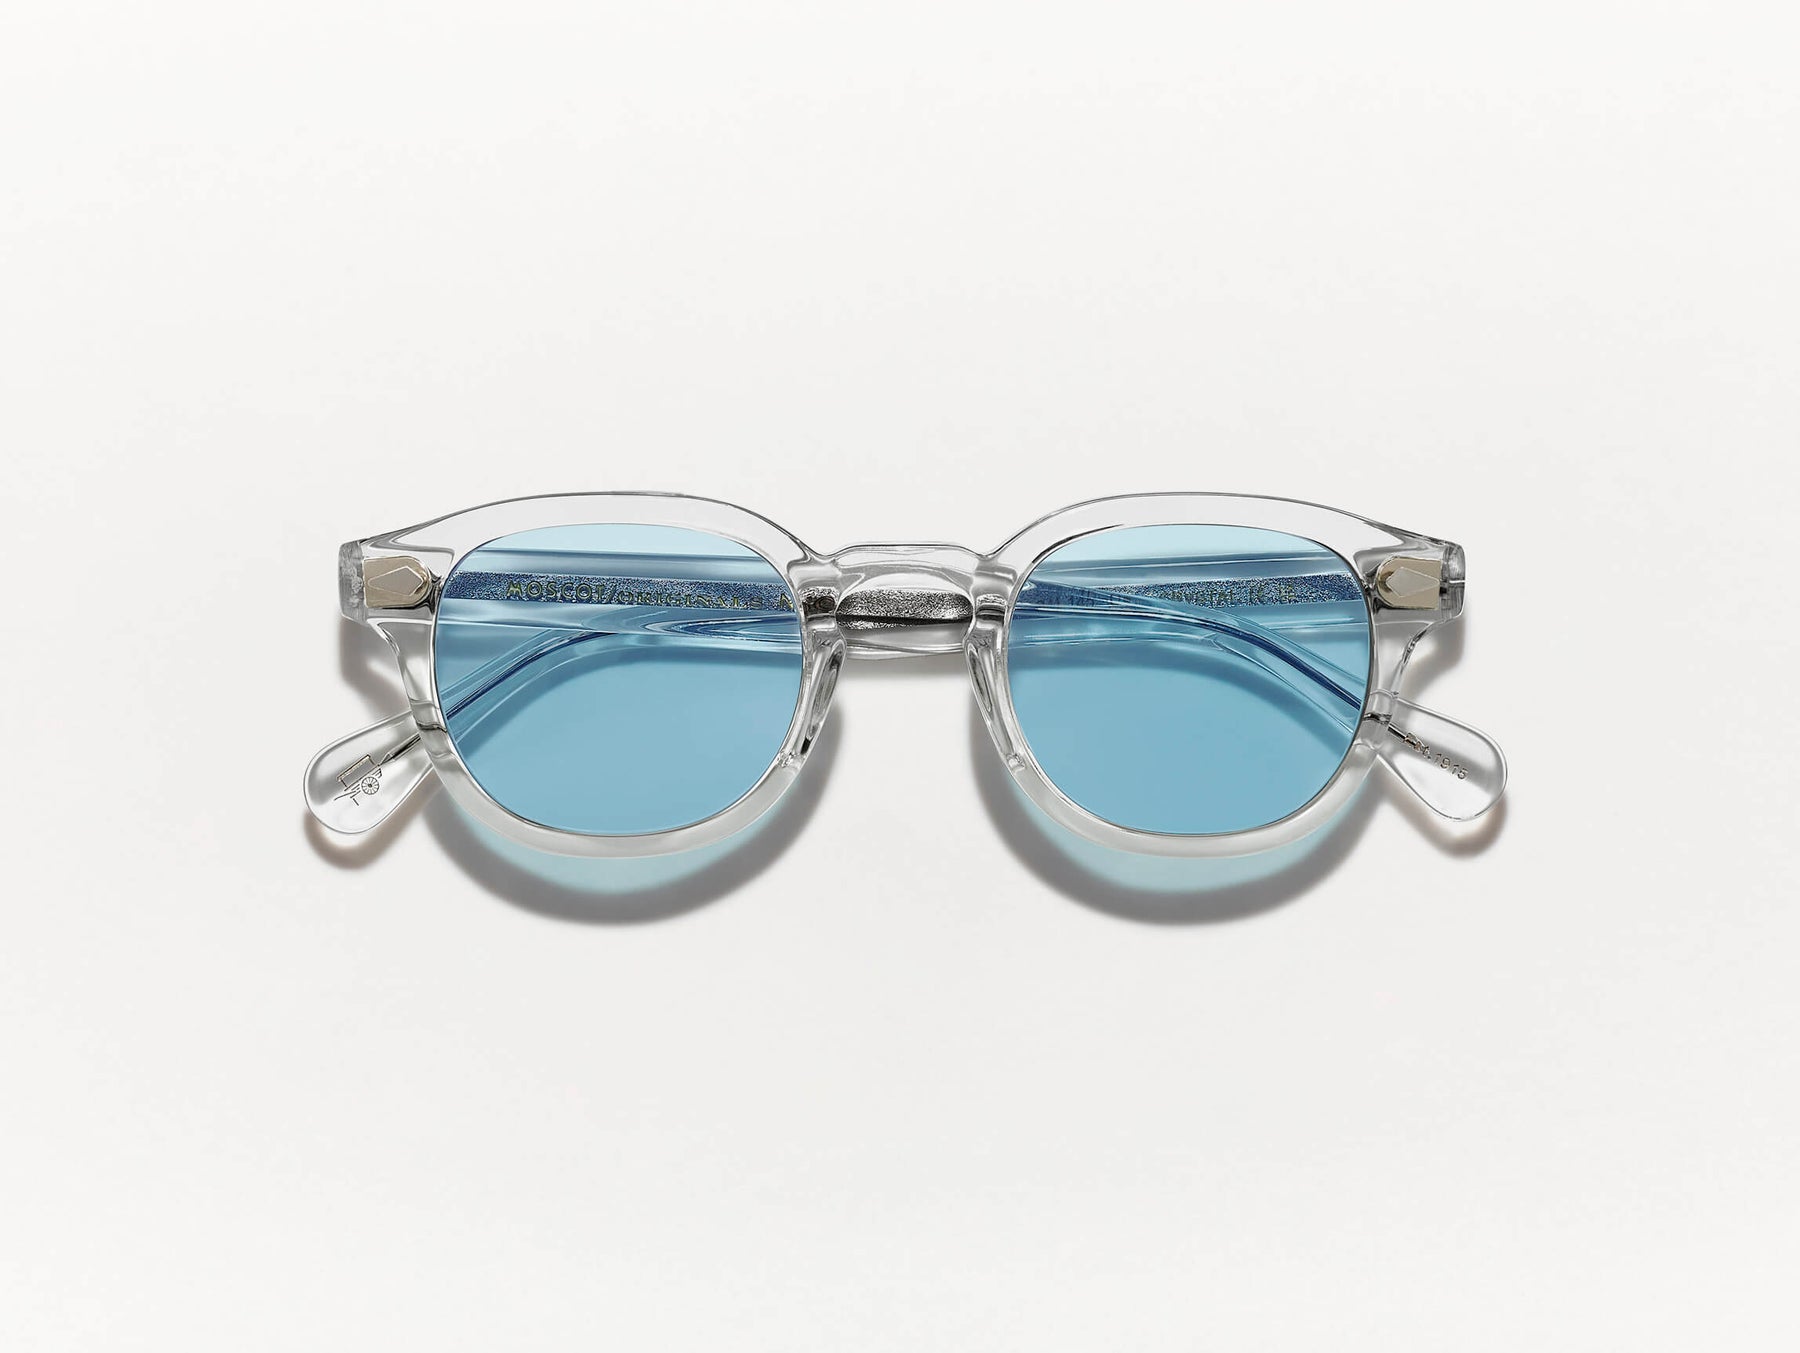 The LEMTOSH SUN in Crystal with DG-37 Blue Glass Lenses